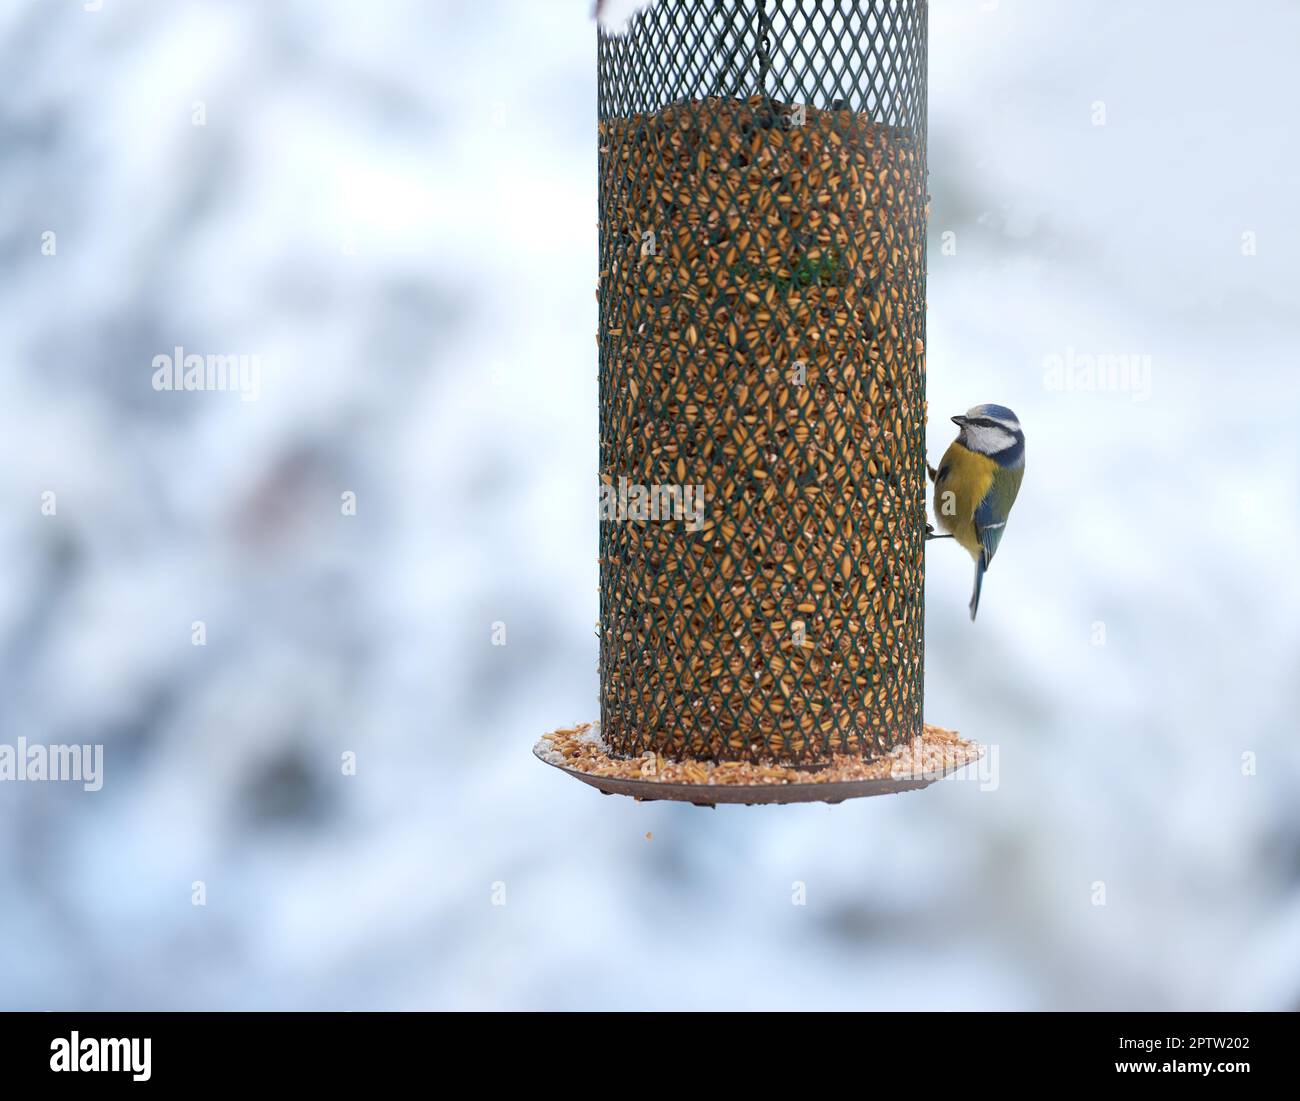 The great tit (Parus major) is a passerine bird in the tit family Paridae.  It is a widespread and common species throughout Europe, the Middle East, C  Stock Photo - Alamy